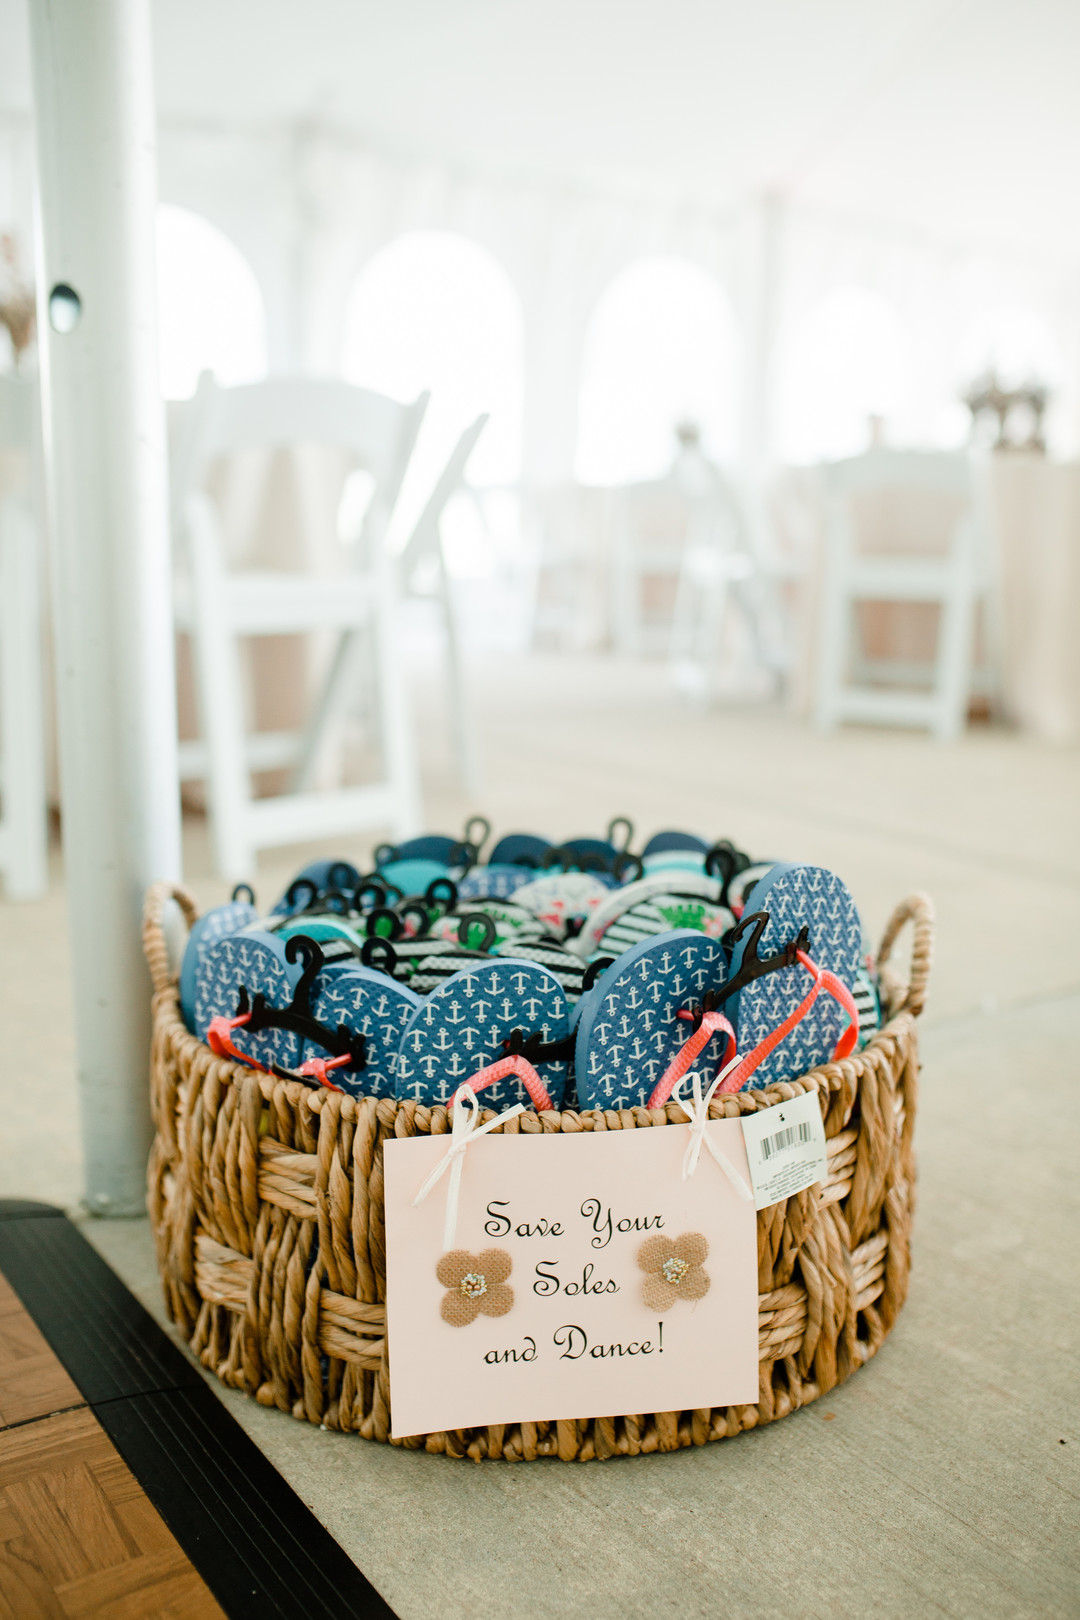 Wedding reception ideas: Rustic country wedding in Minooka, IL captured by Katie Brsan Photography. Visit CHItheeWED.com for more wedding inspiration!